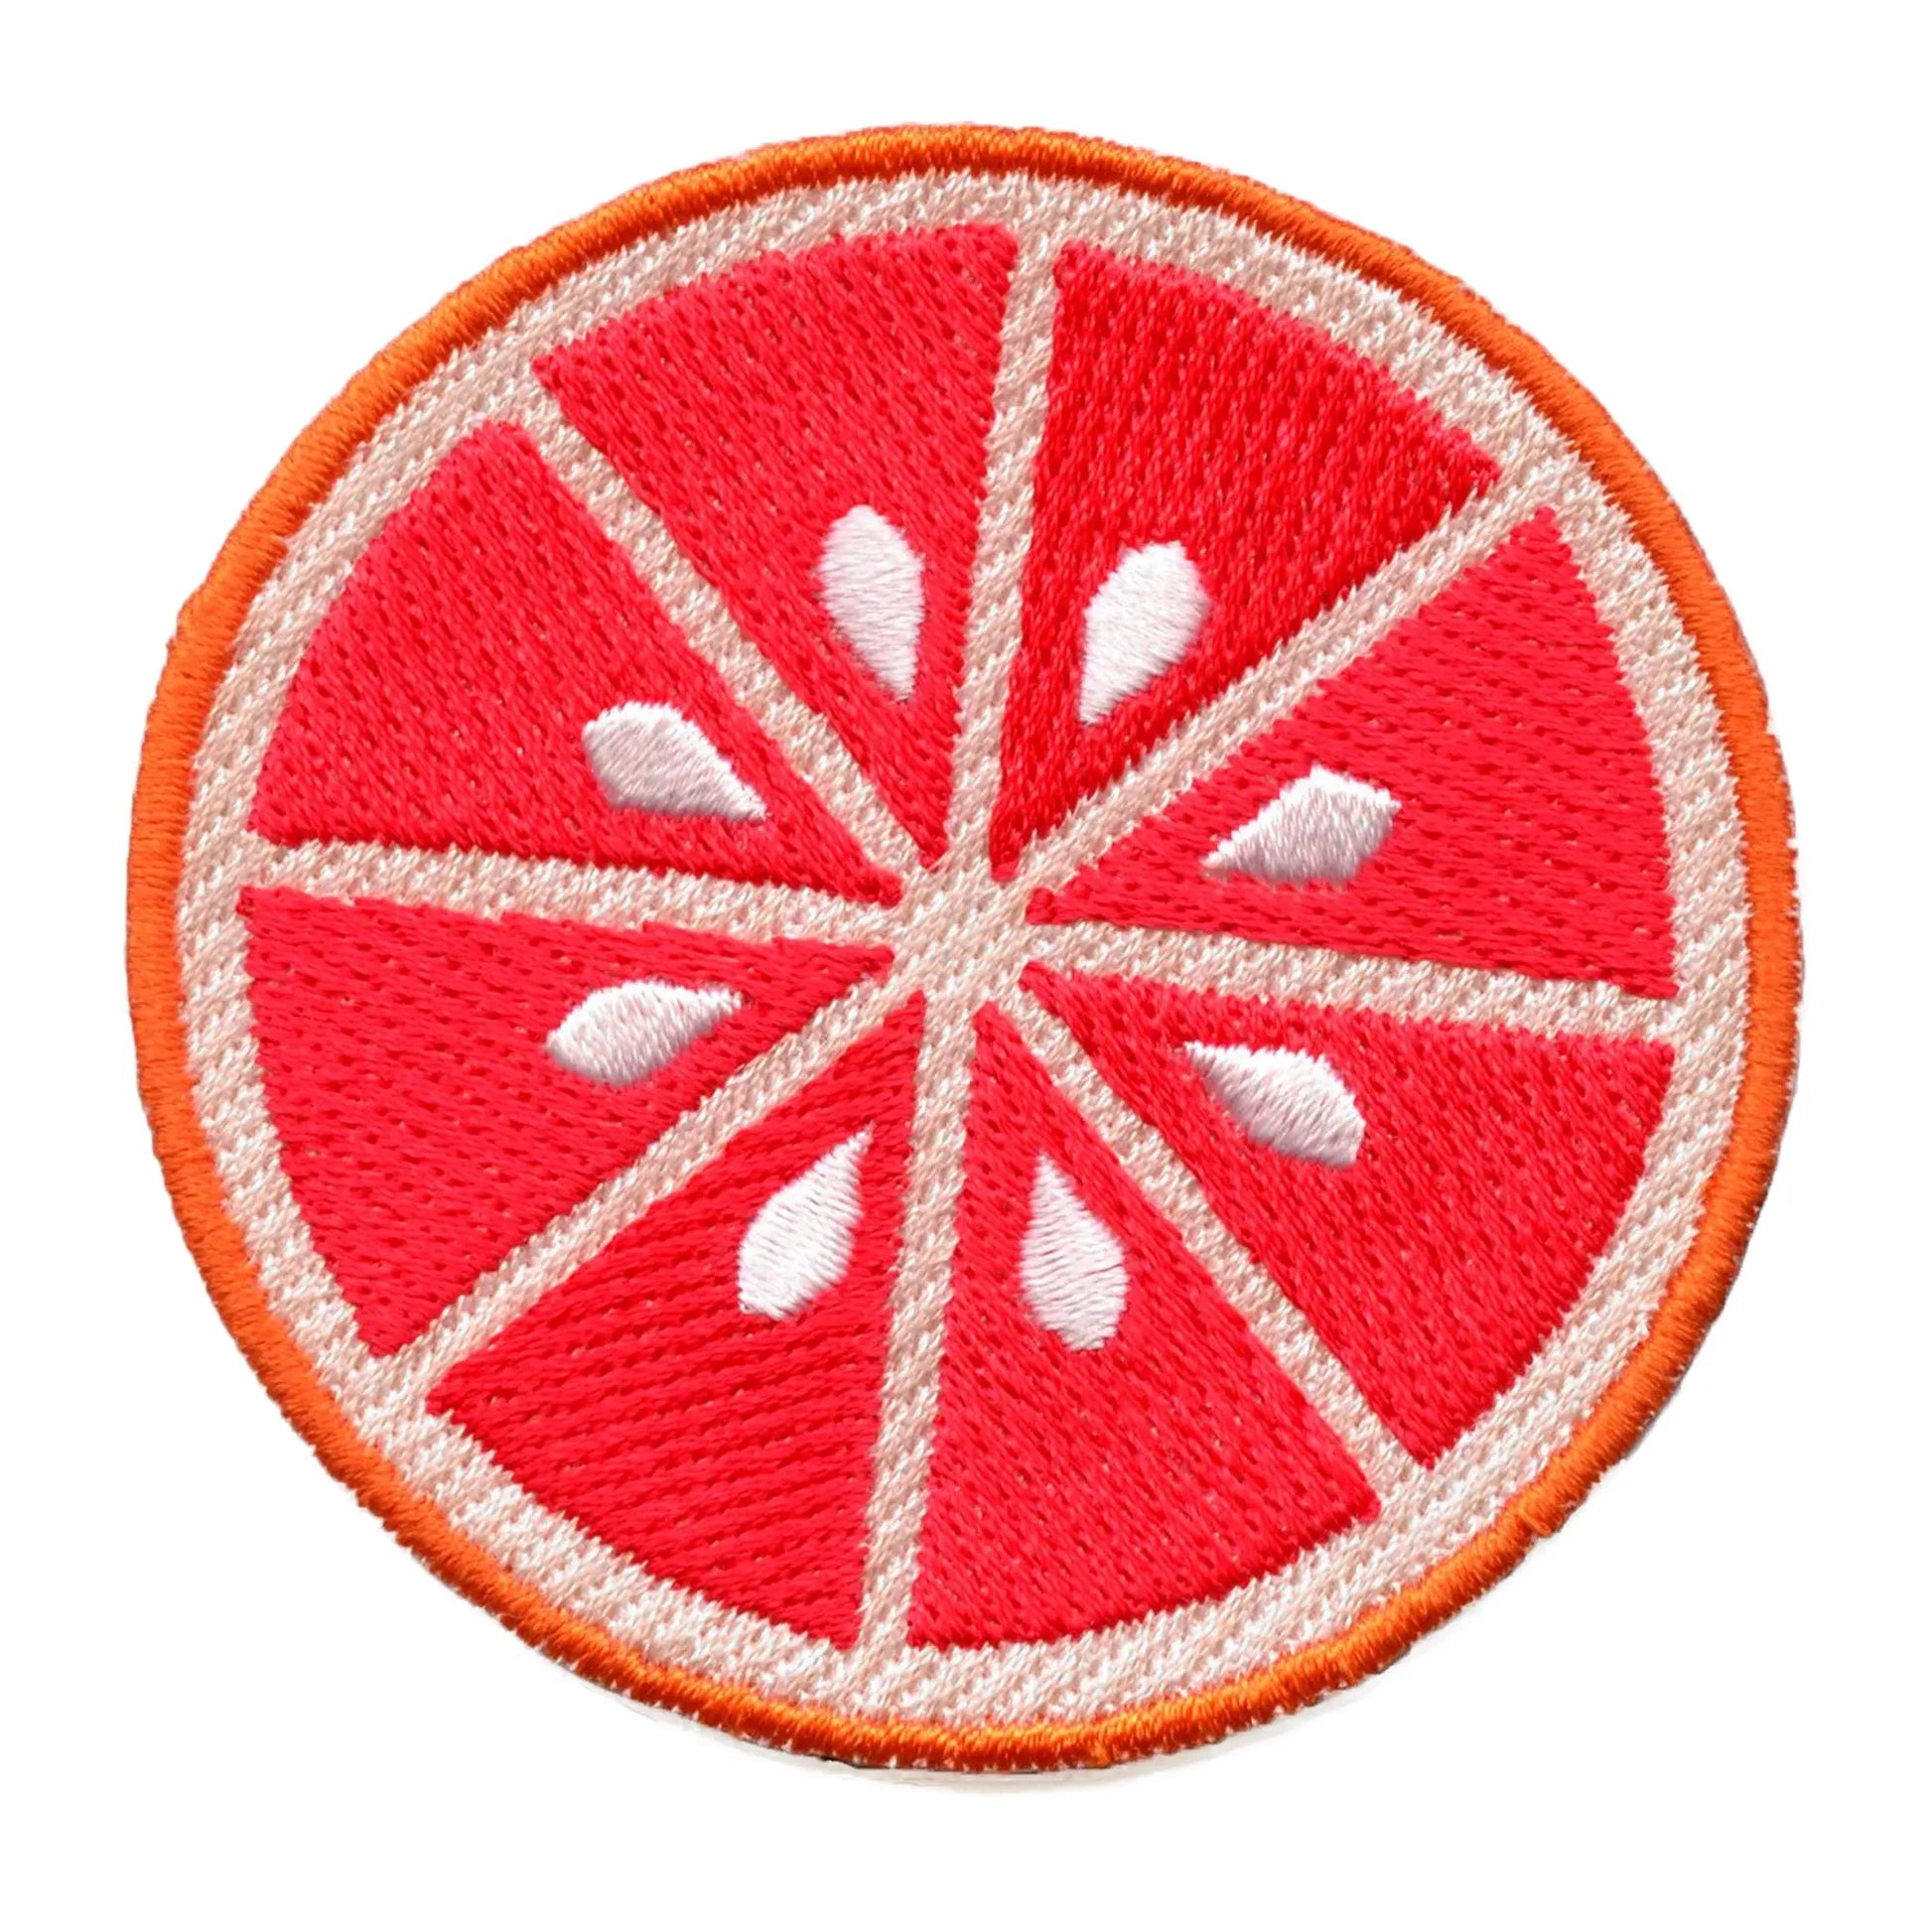 Grapefruit Slice Round Patch Fresh Cut Citrus Embroidered Iron On 